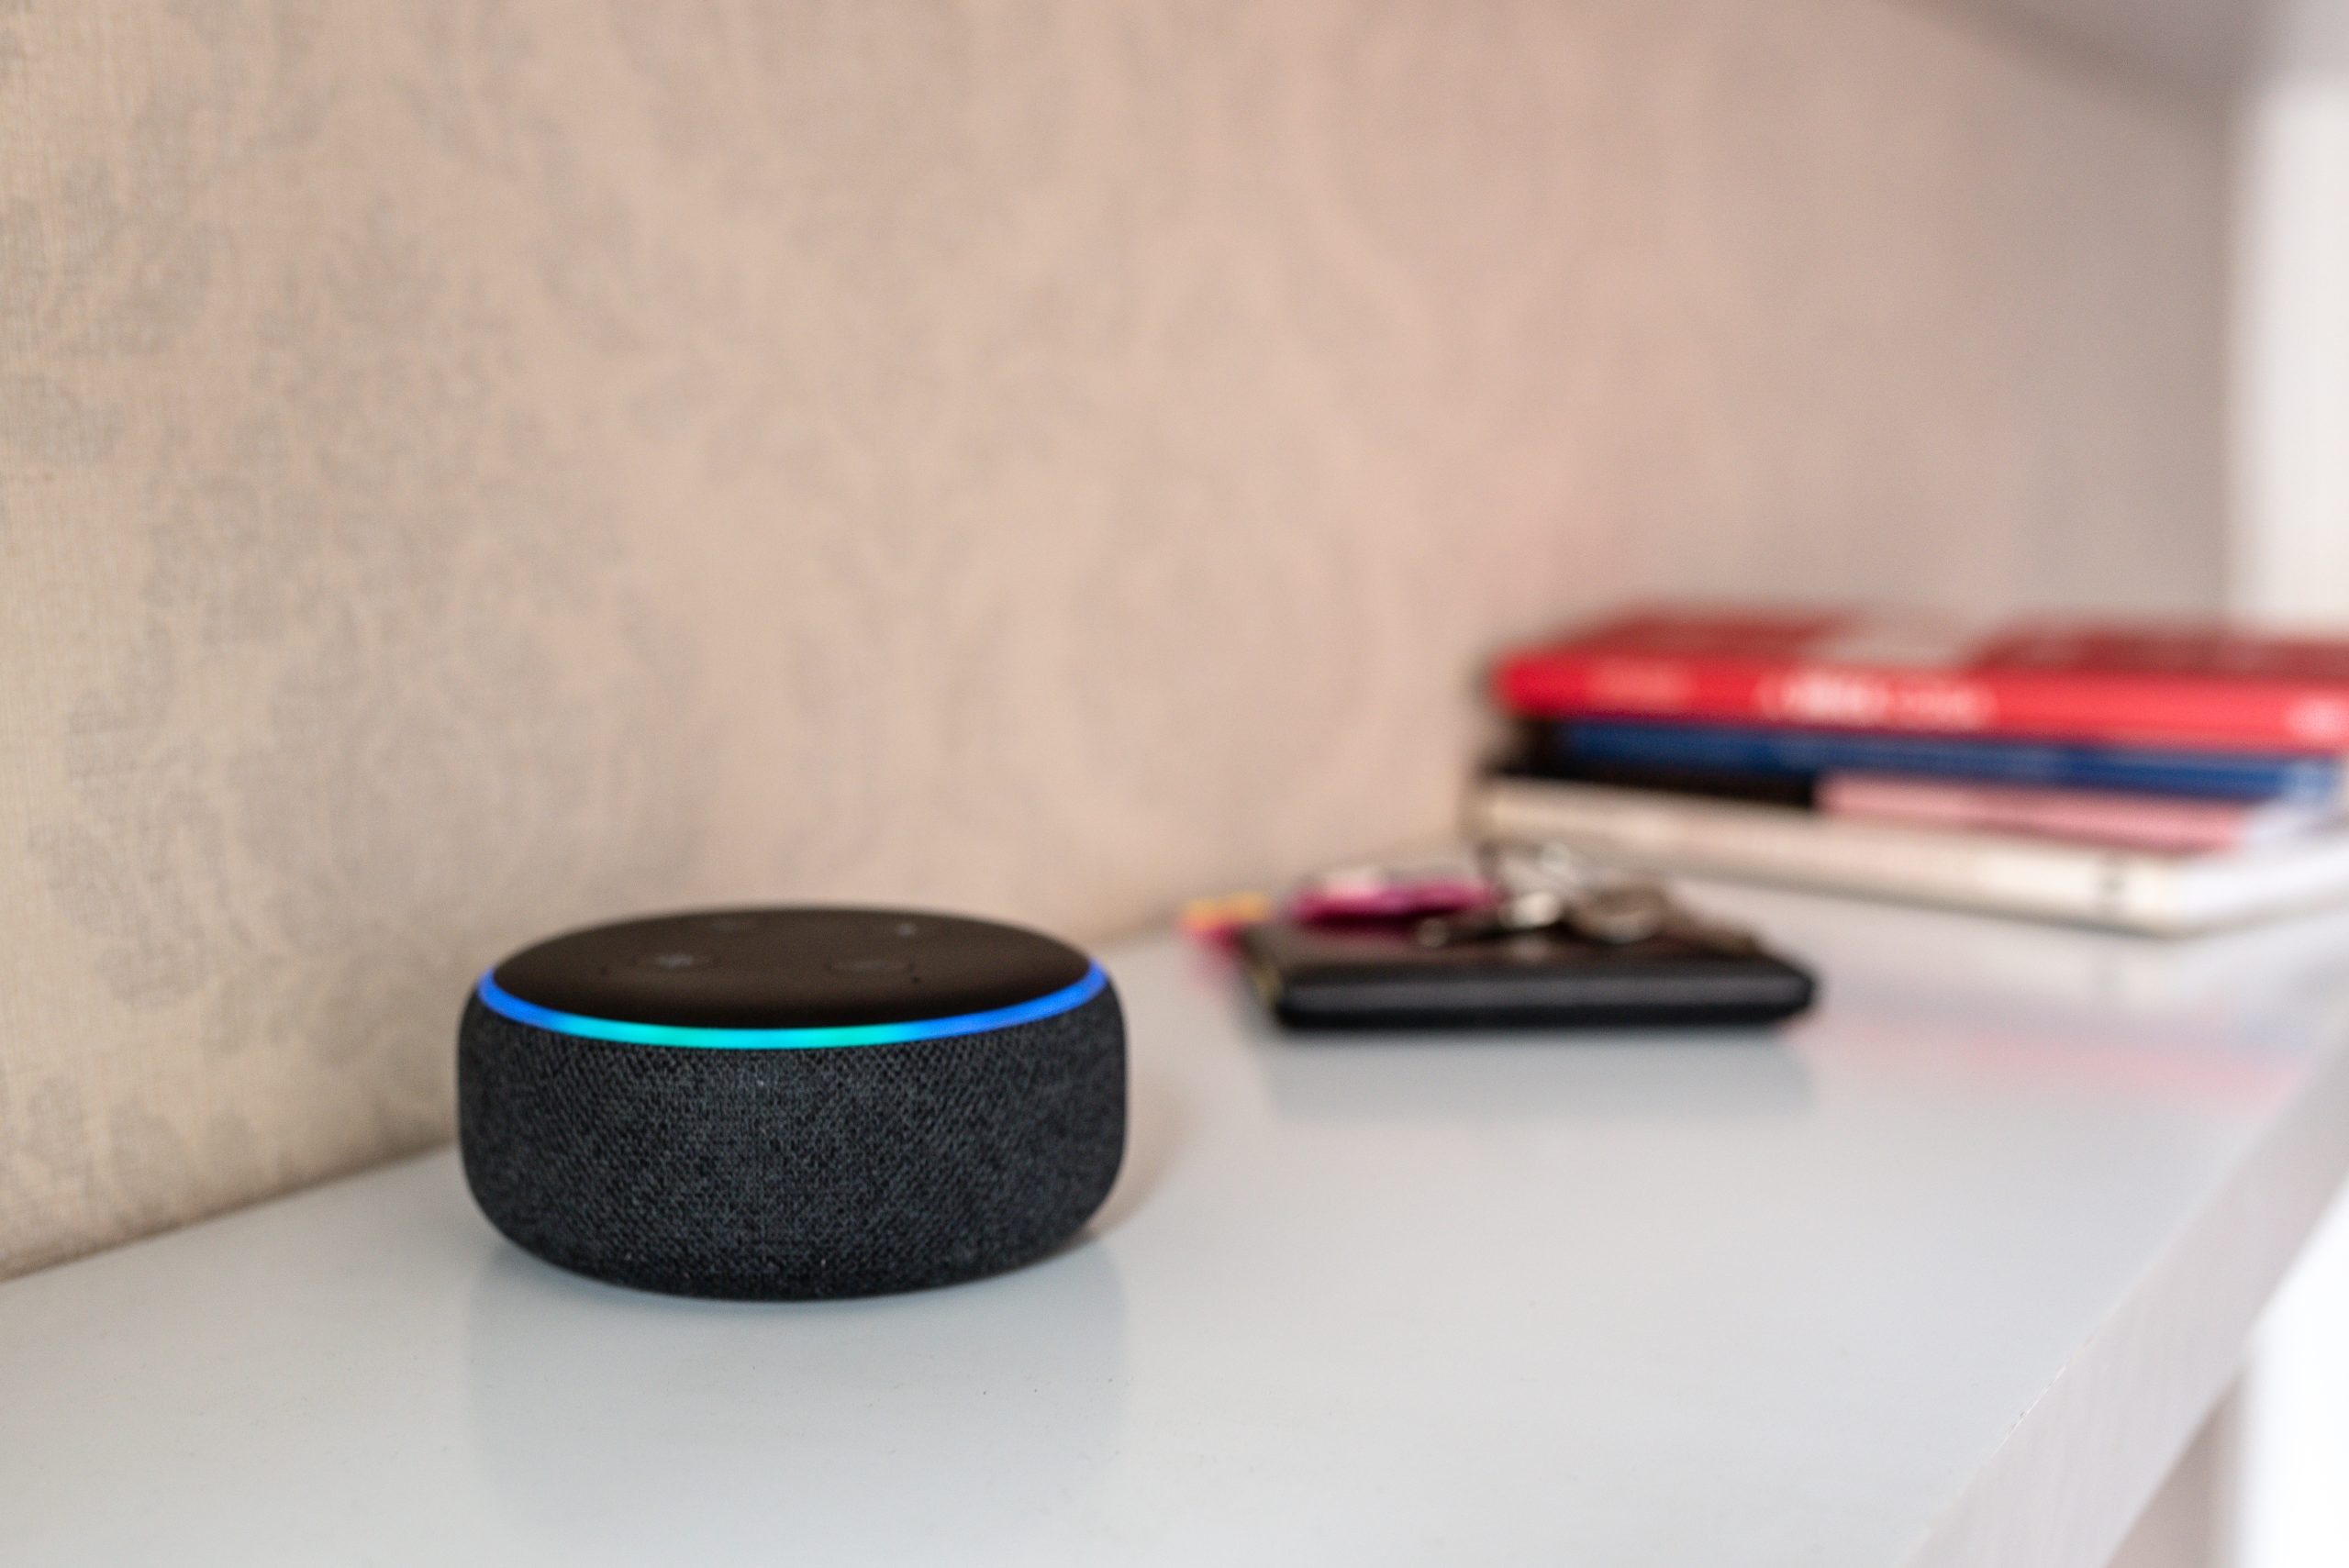 Smart speaker with integrated voice assistant on a kitchen worktop